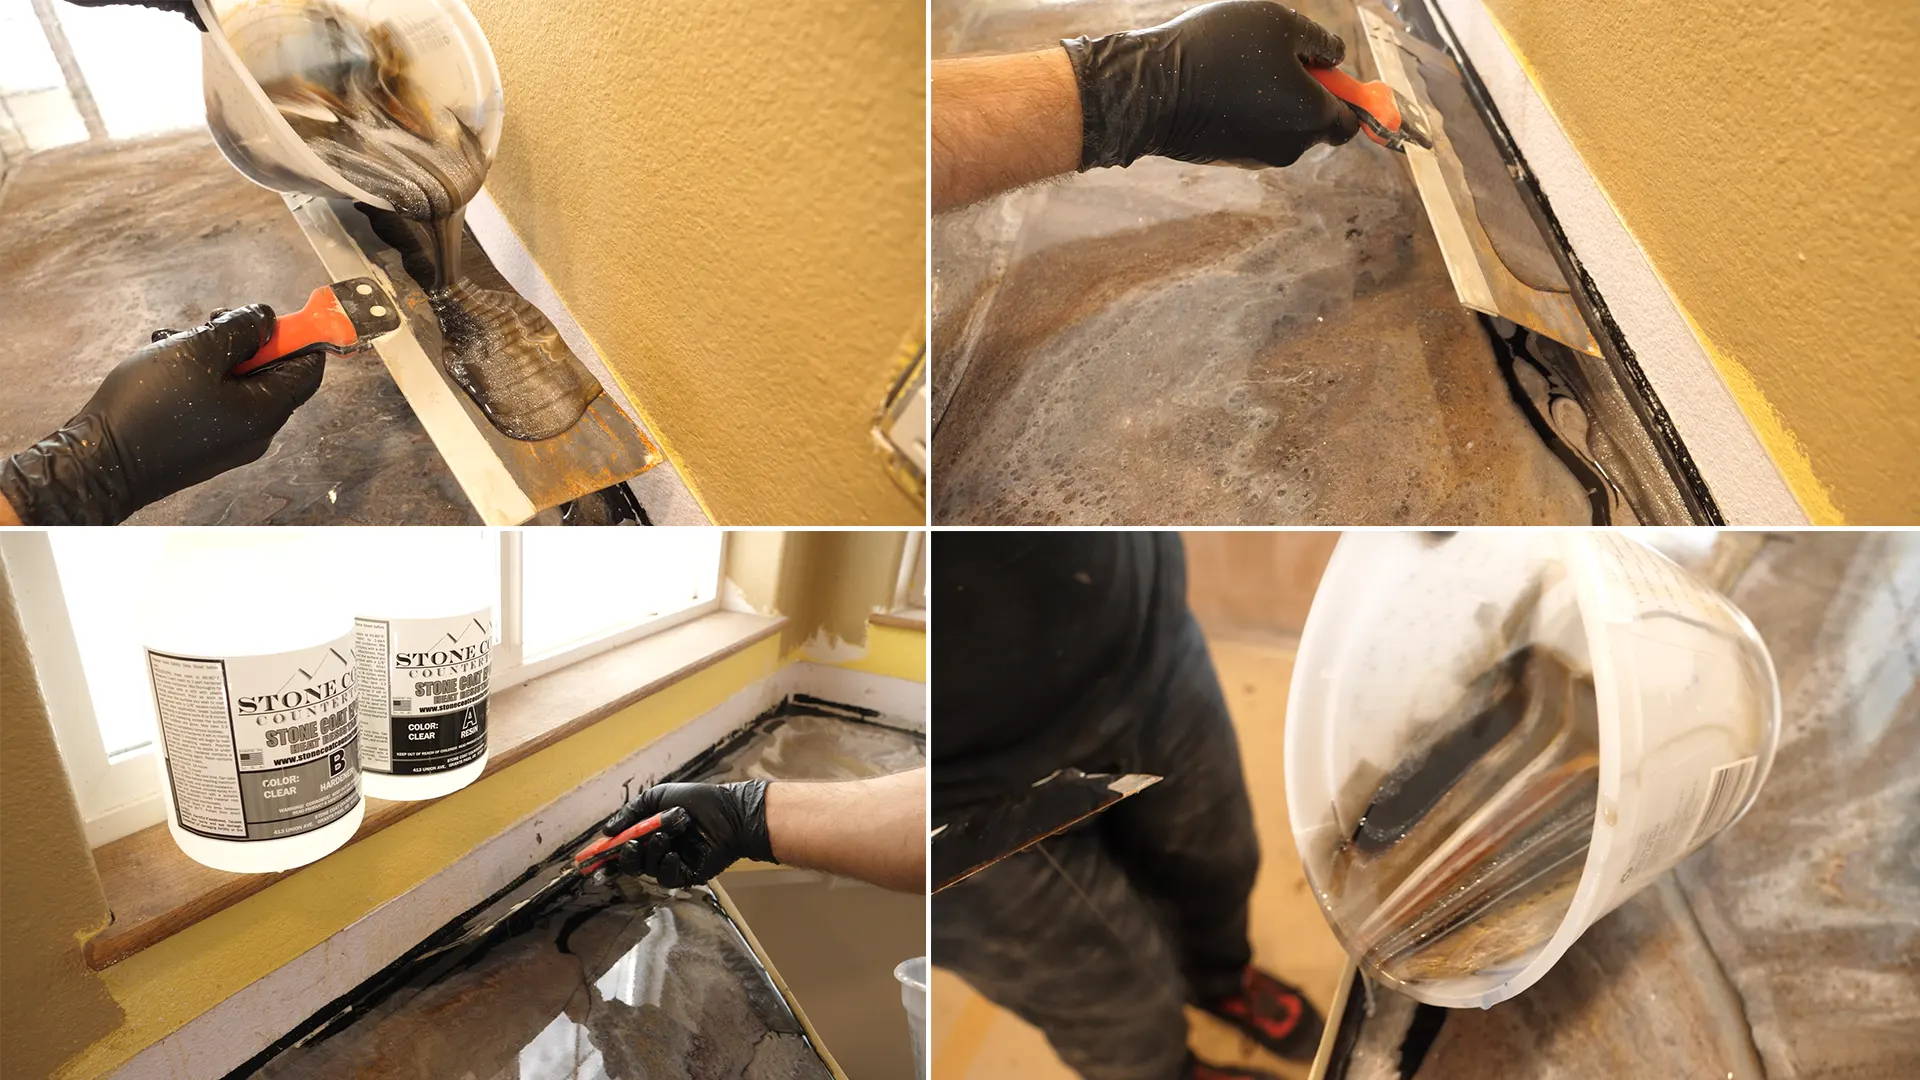 Utilizing a drywall knife to apply epoxy in hard-to-reach areas near the wall, pouring slowly along the tape edge to fill gaps.